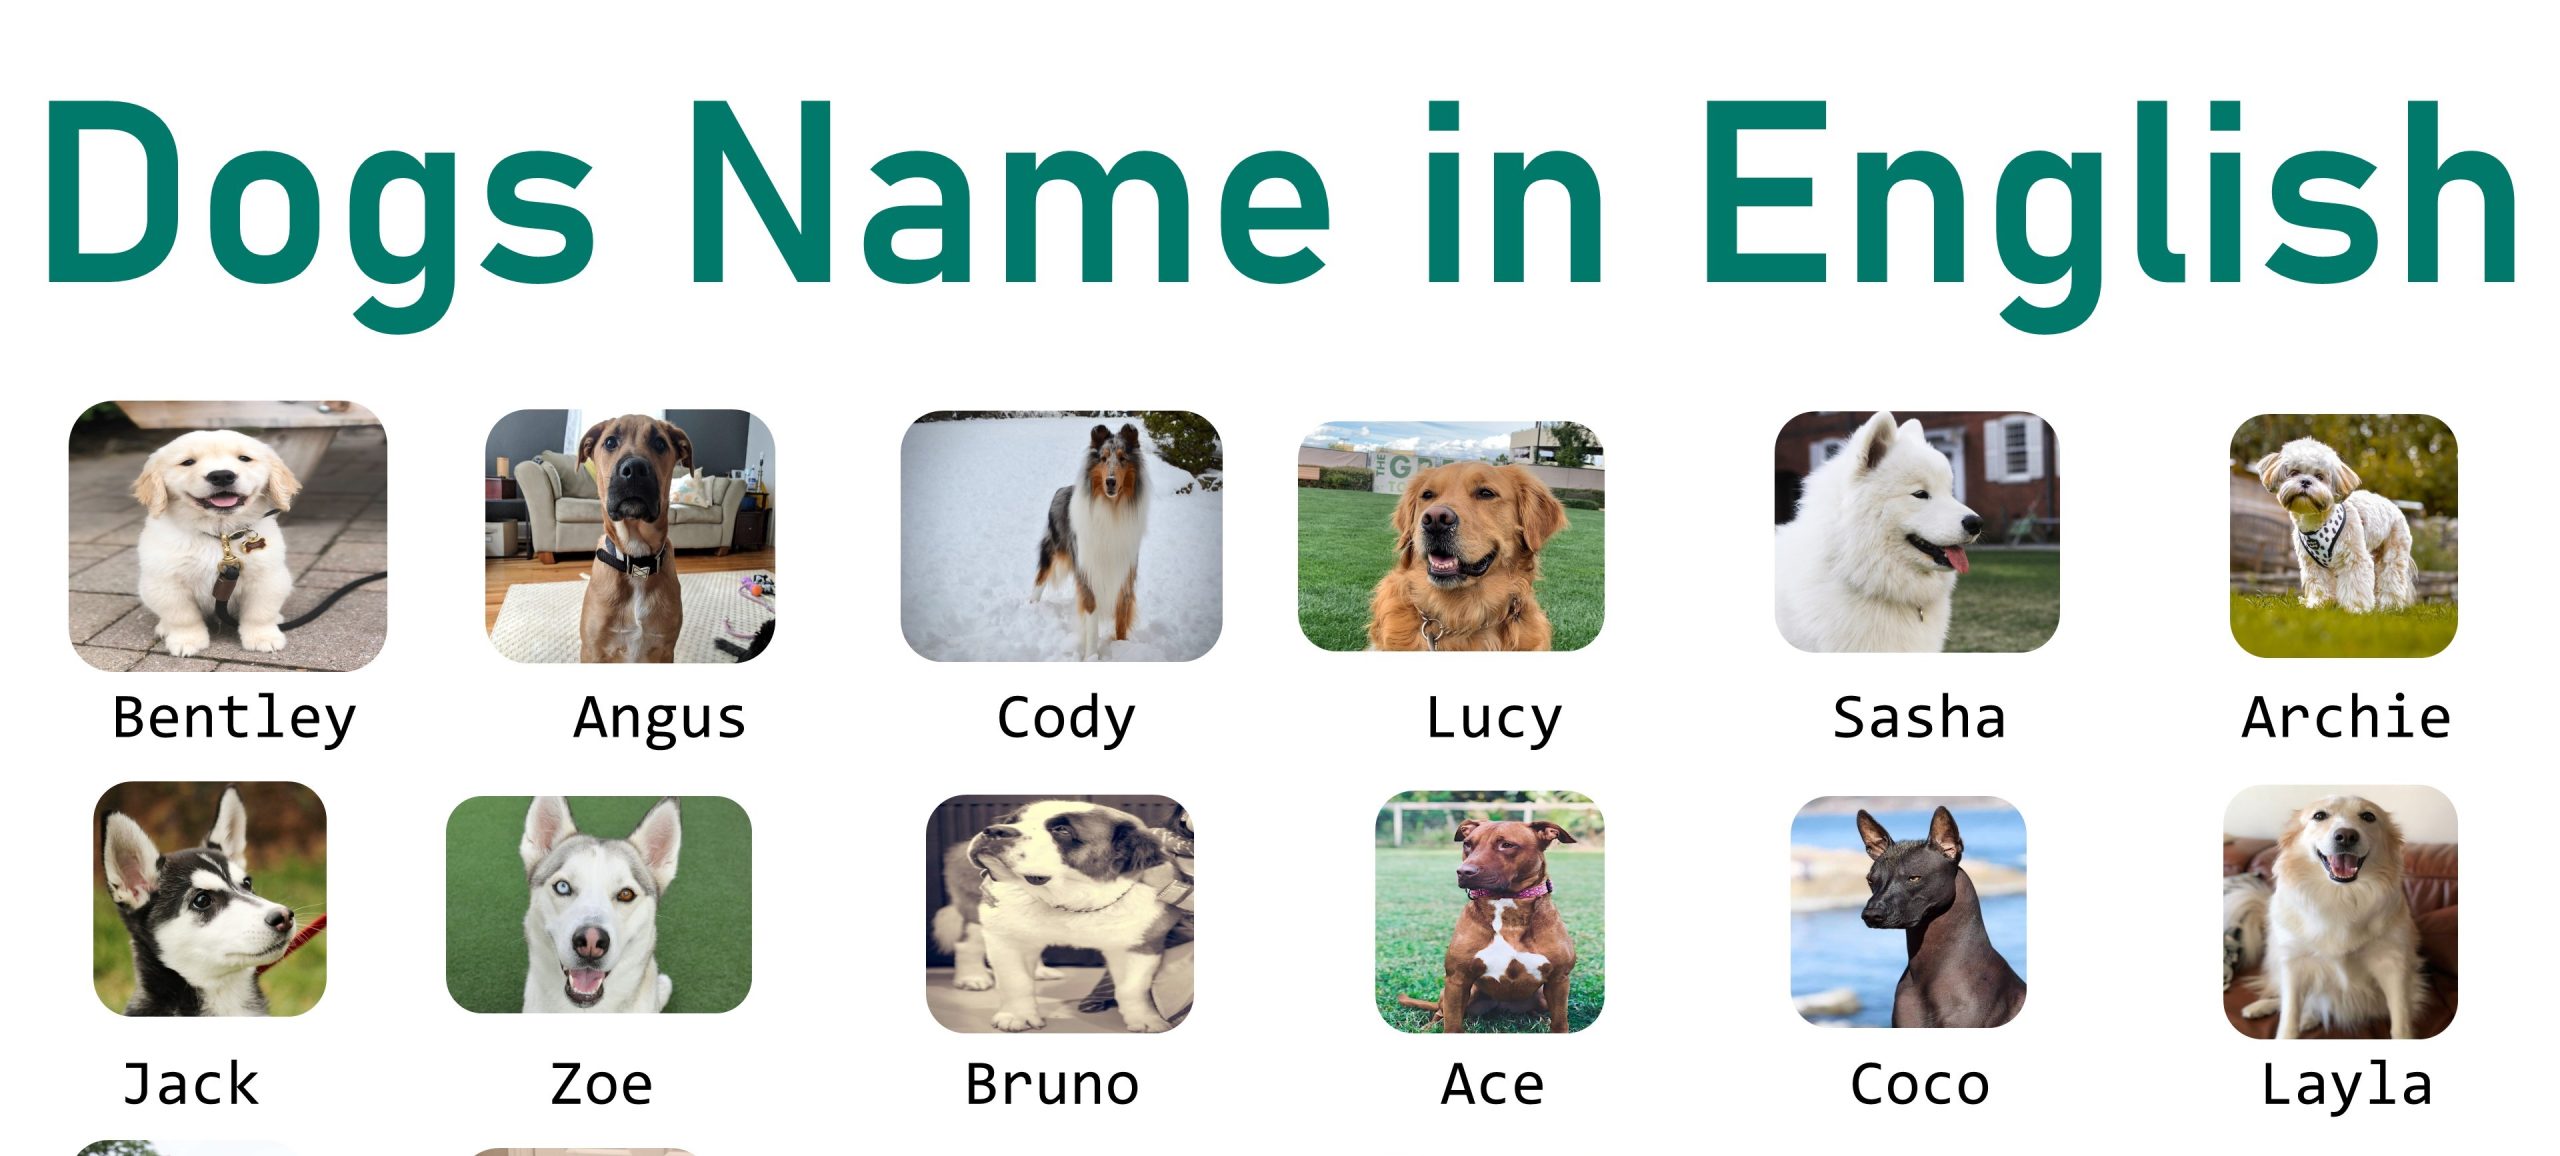 100+ Unique Dogs Name in English with Pictures